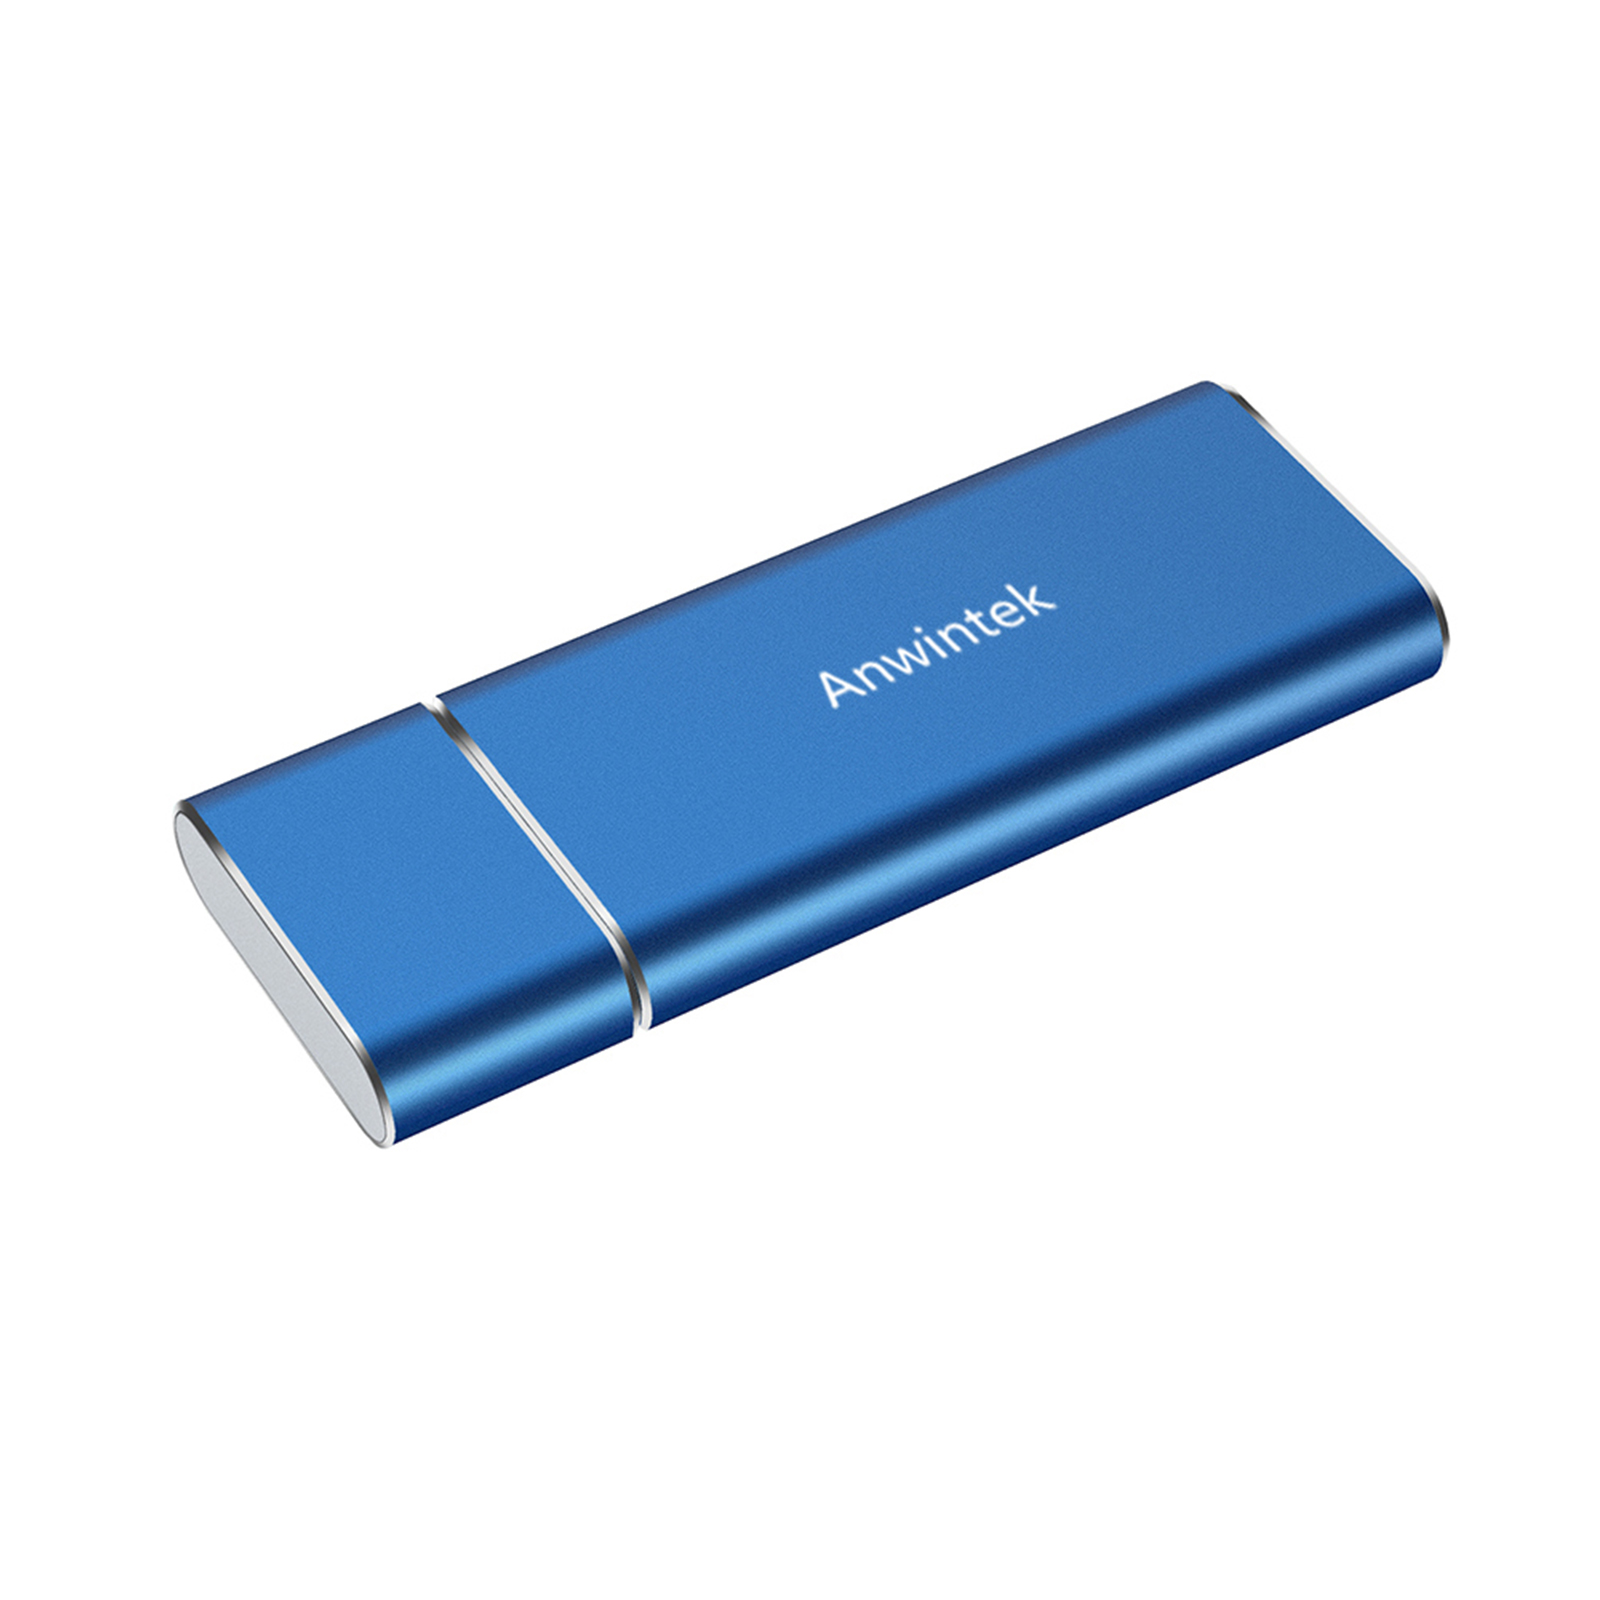 M.2 Ngff To Usb3.0 SSD Enclosure Solid State Hard Disk Box Portable U Disk Type Ngff To Usb3.0 External Mobile Box blue